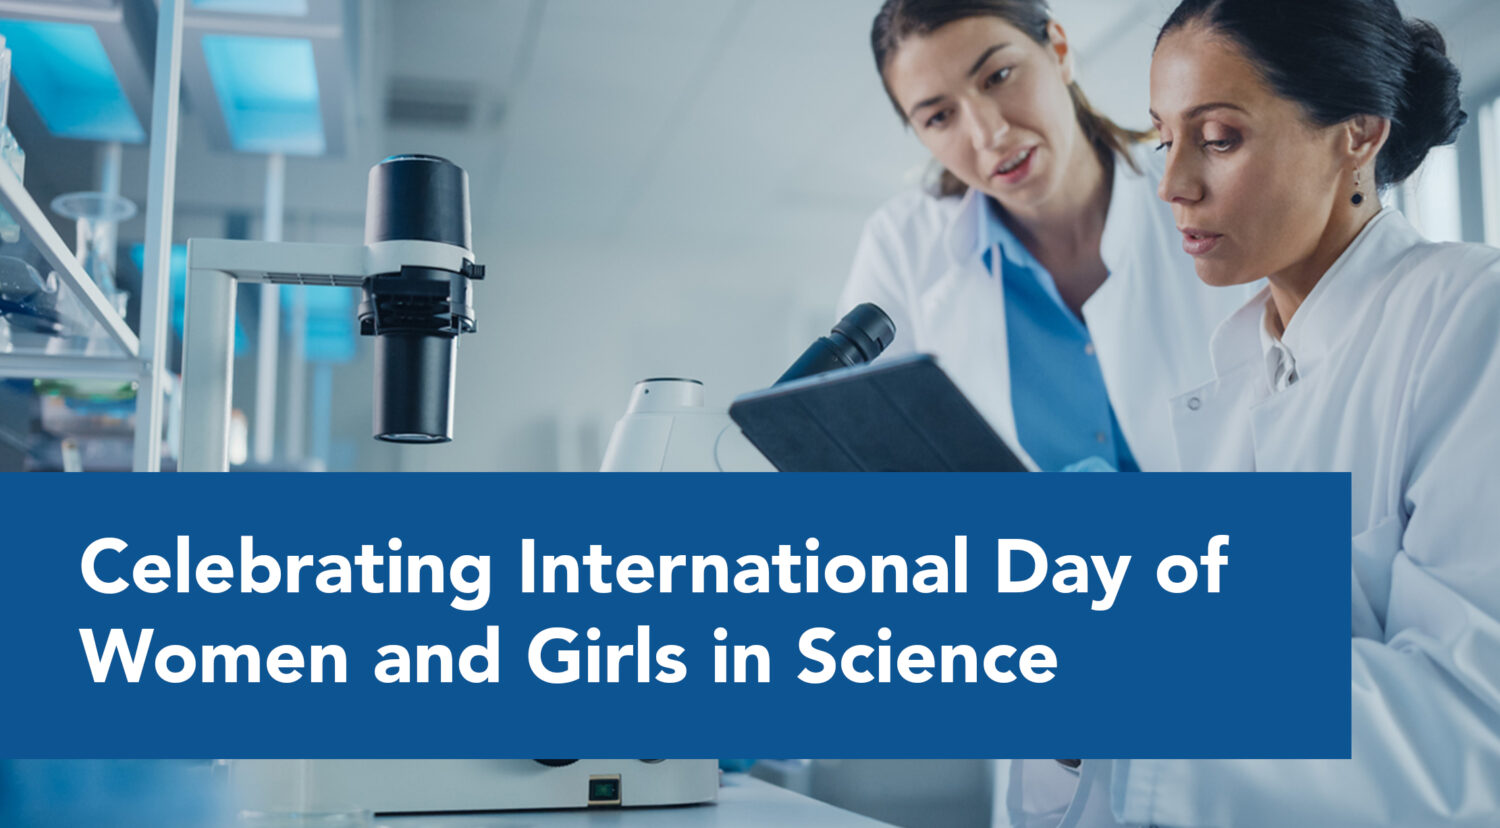 Celebrating the International Day of Women and Girls in Science